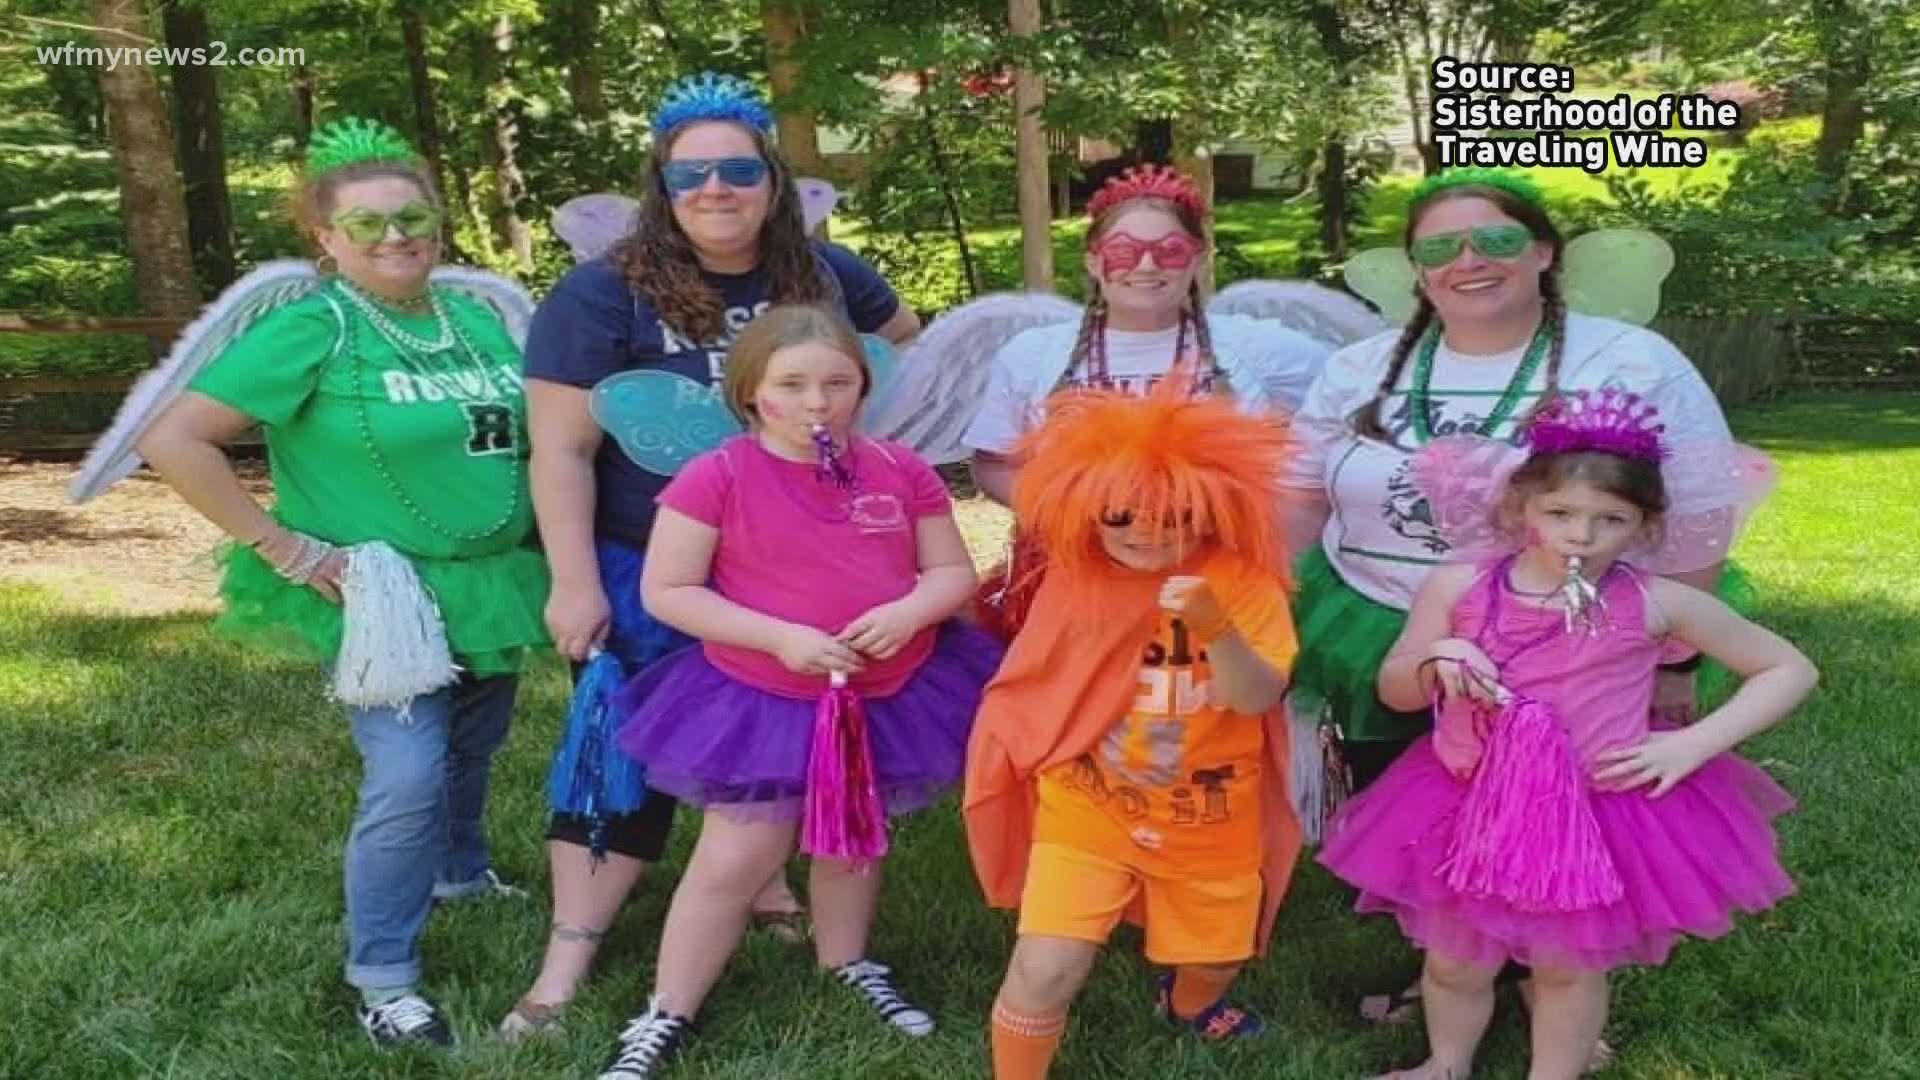 Social media is soaring with rumors of wine fairies in the Carolinas. The group calls themselves the “Sisterhood of the Traveling Wine.”